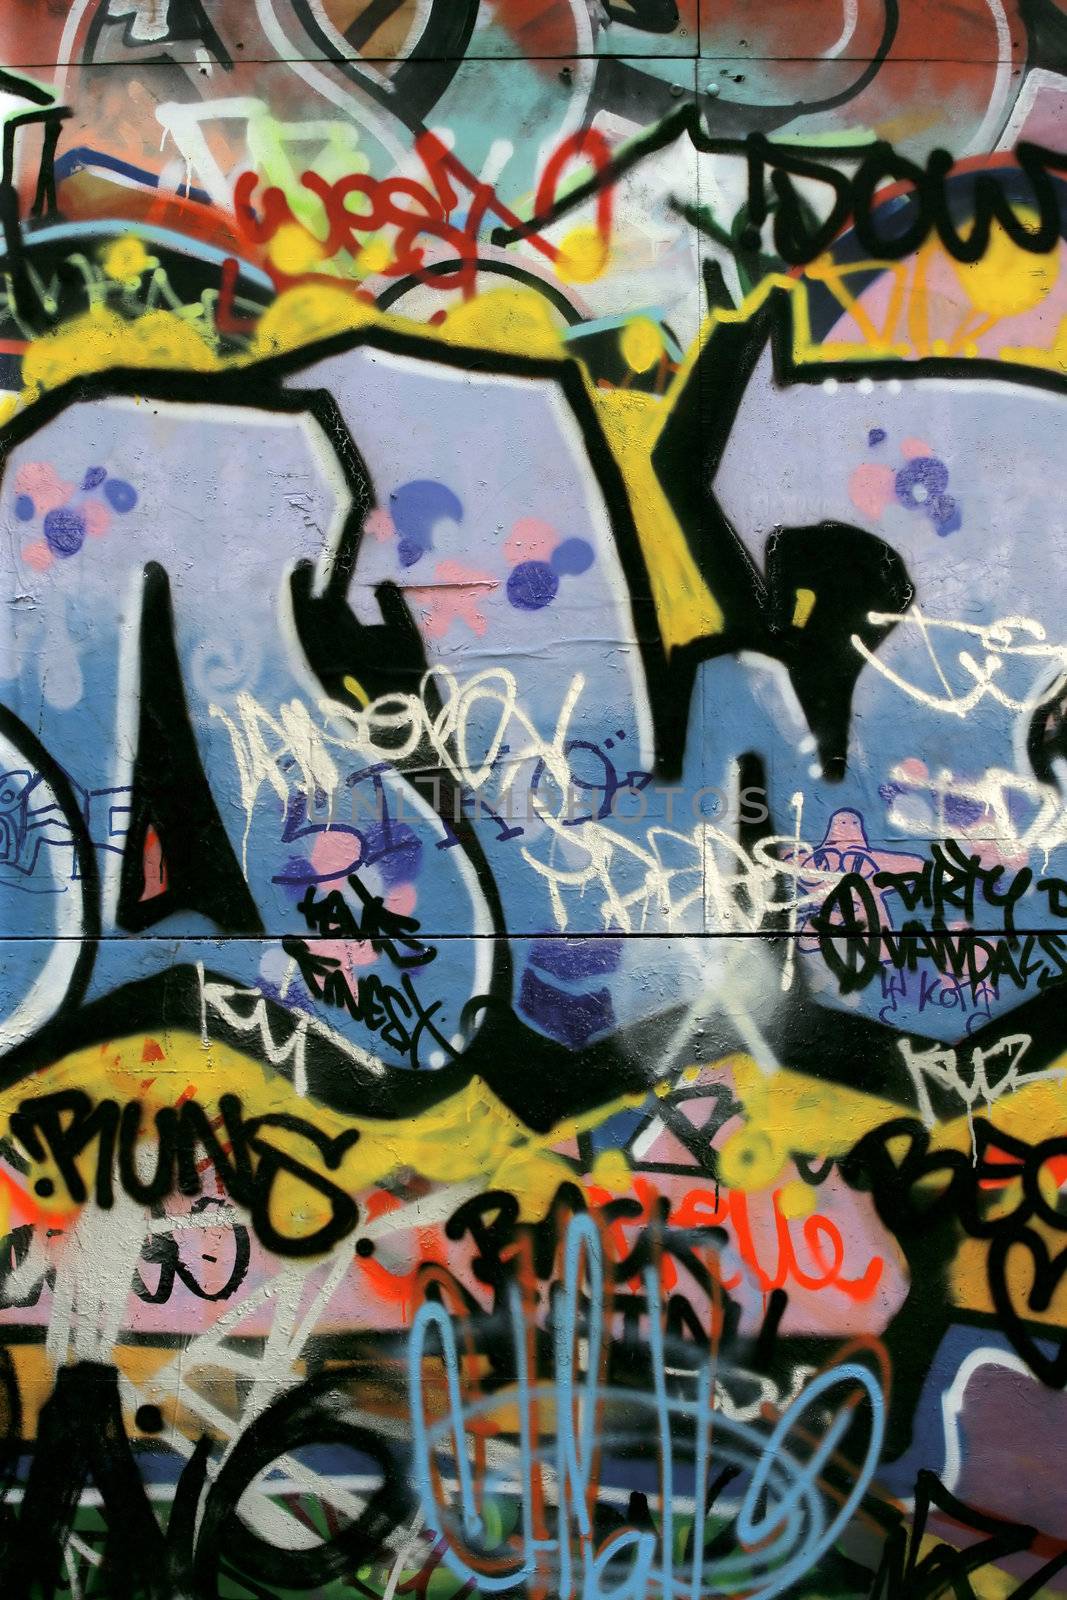 Graffiti and tagging vandalism in a back alley of London, England where skateboarders congregate.
